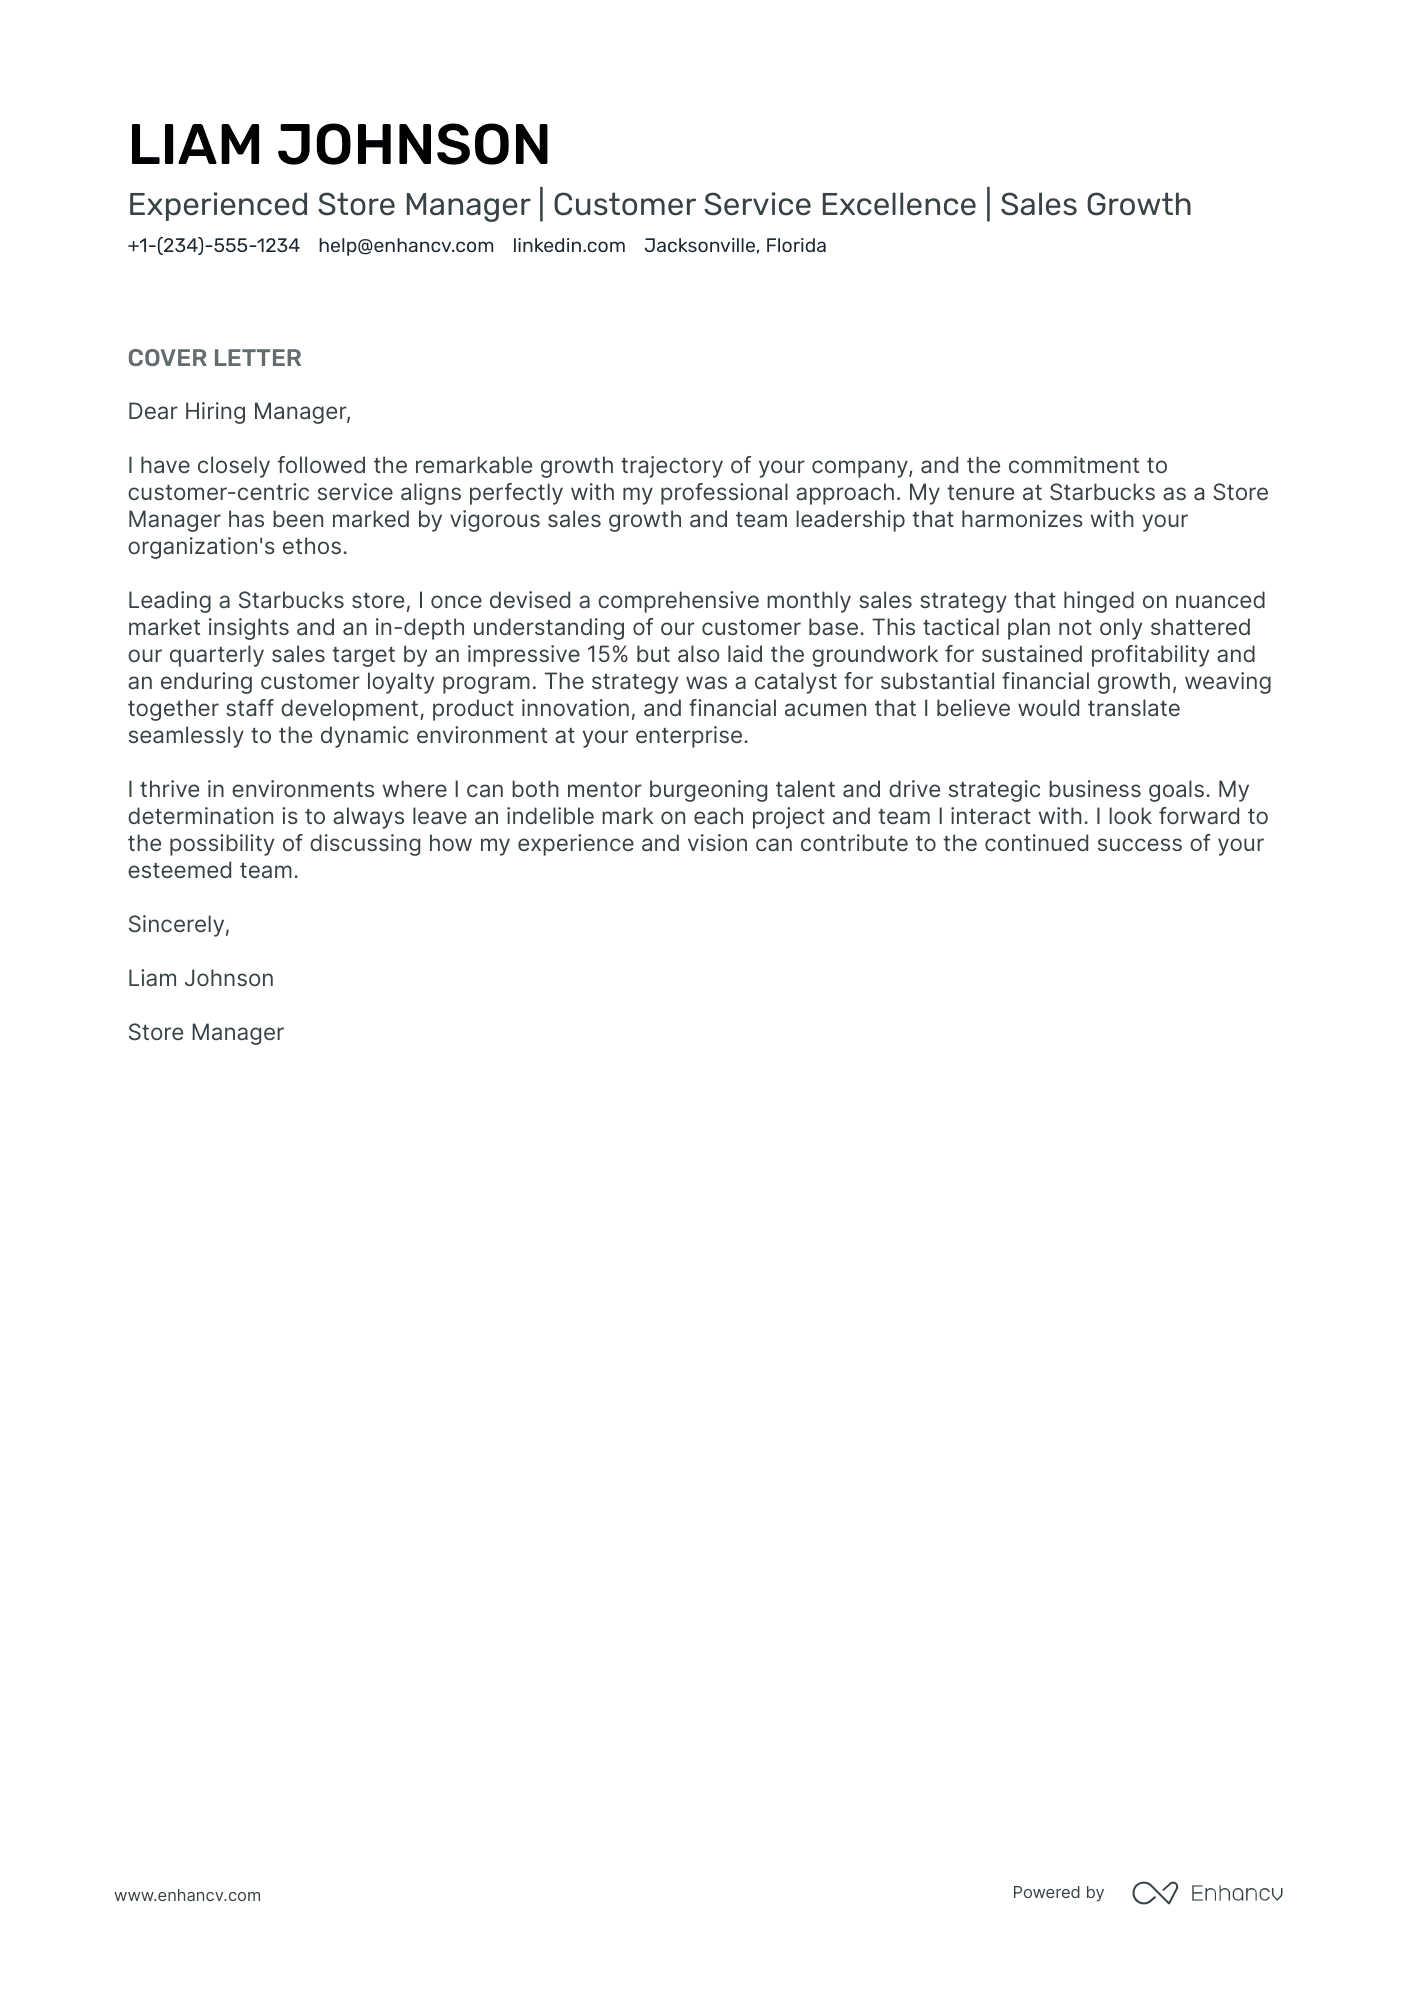 application letter about store manager